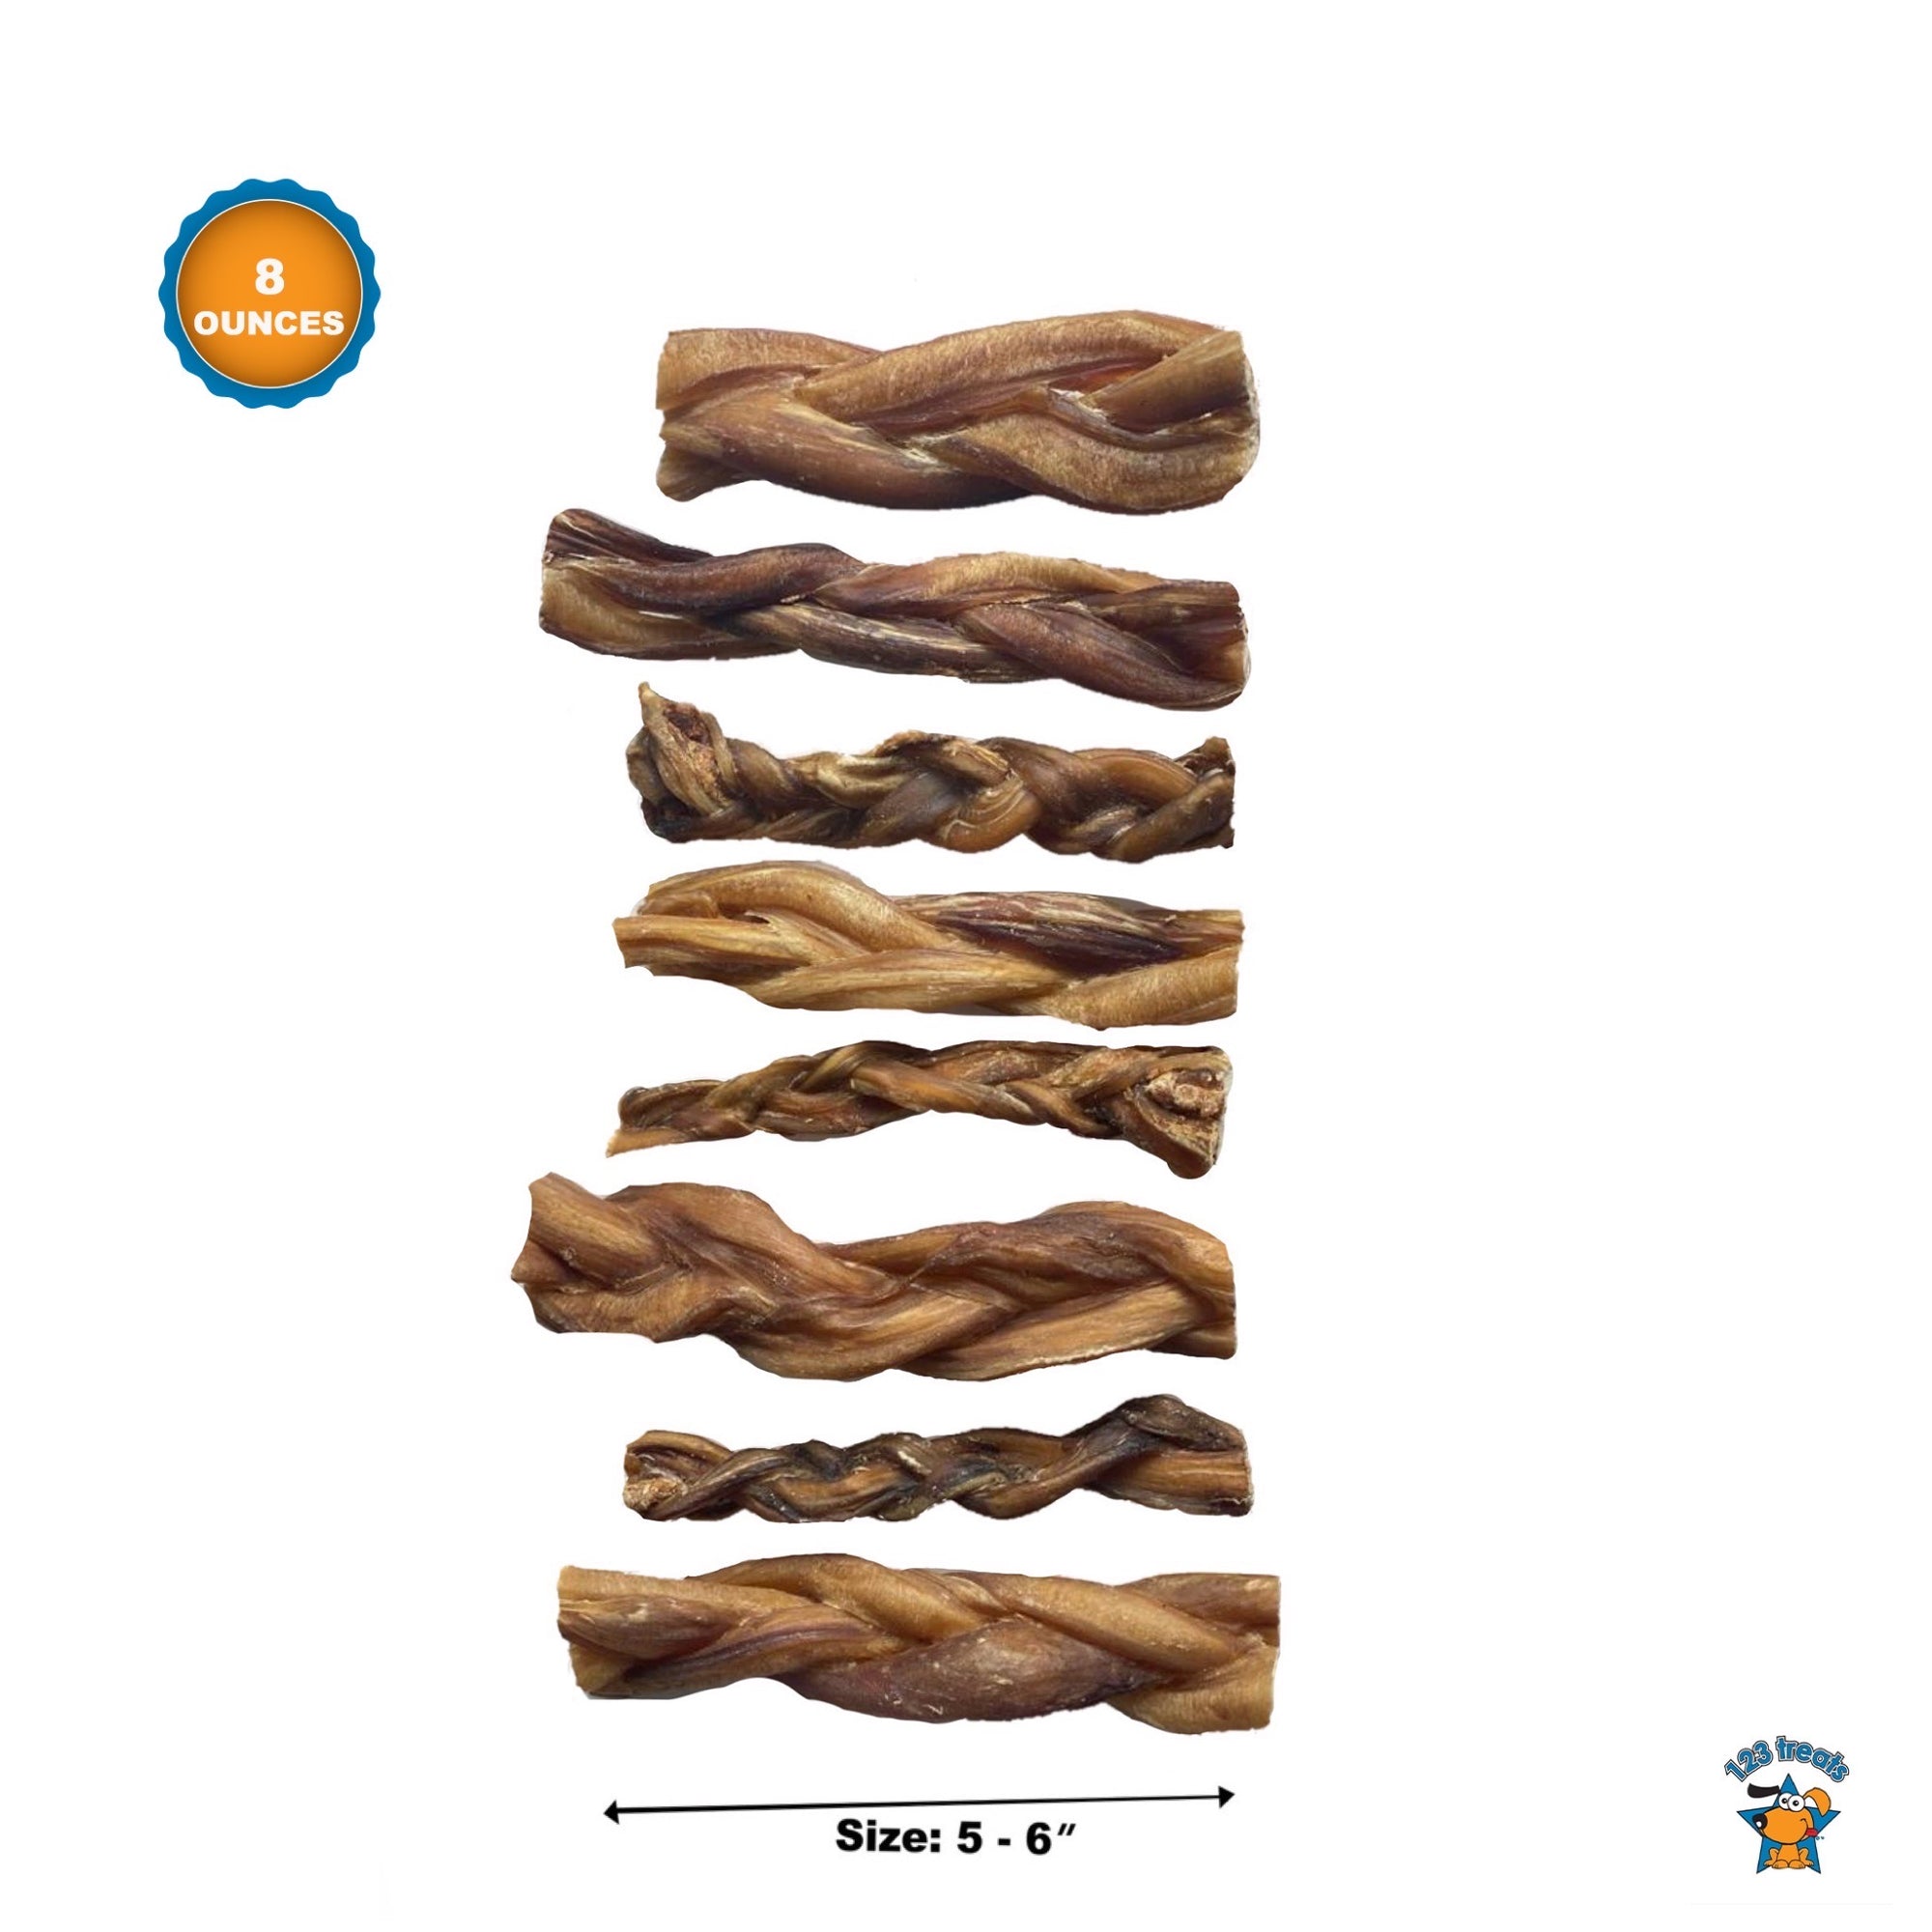 Braided Bully Sticks 5-6 inches chews for dogs (8 ounce bag) all Natural Beef chews